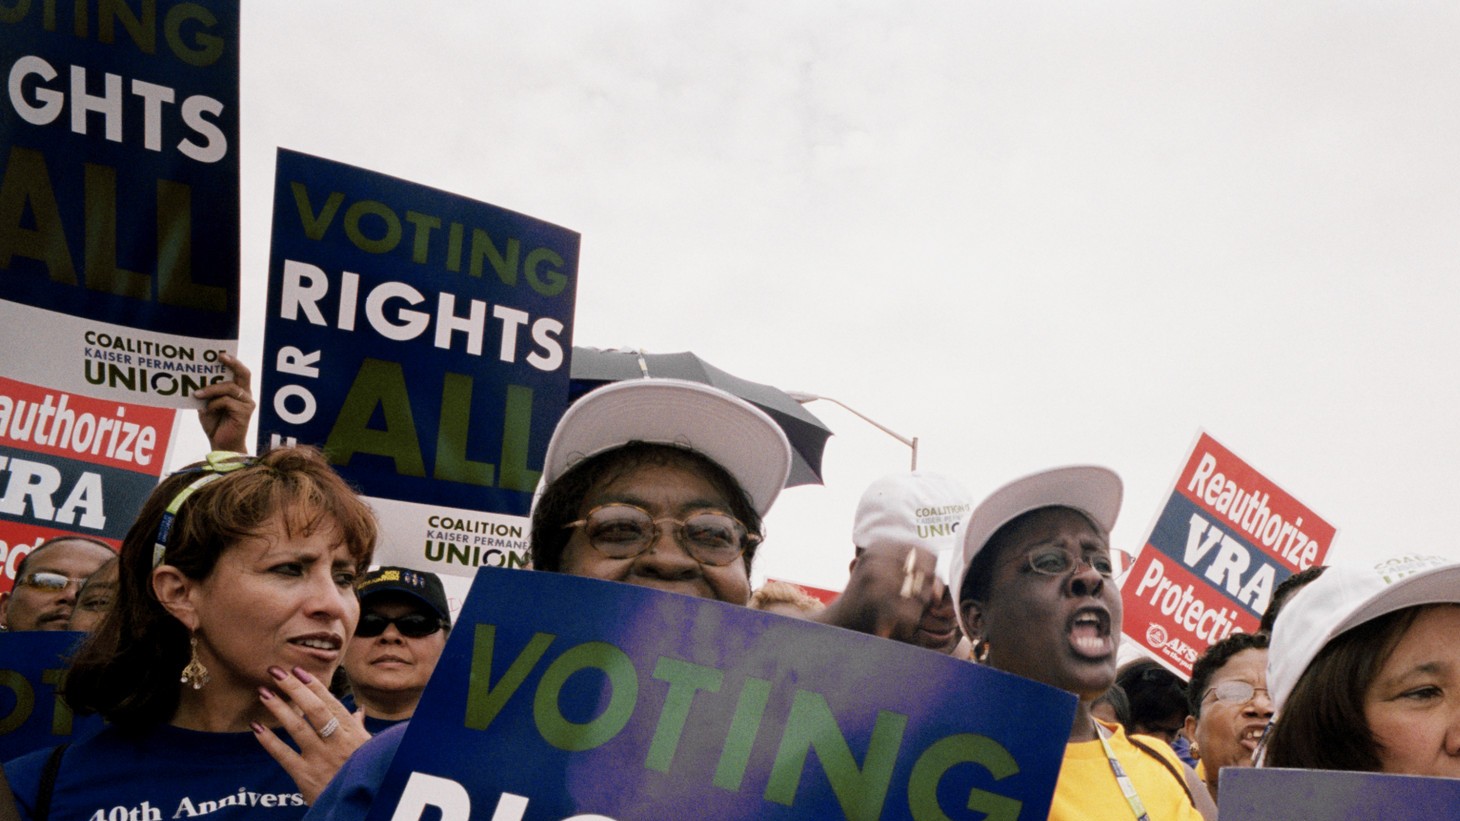 KP workers attend a voting rights rally during 2005 national agreement bargaining